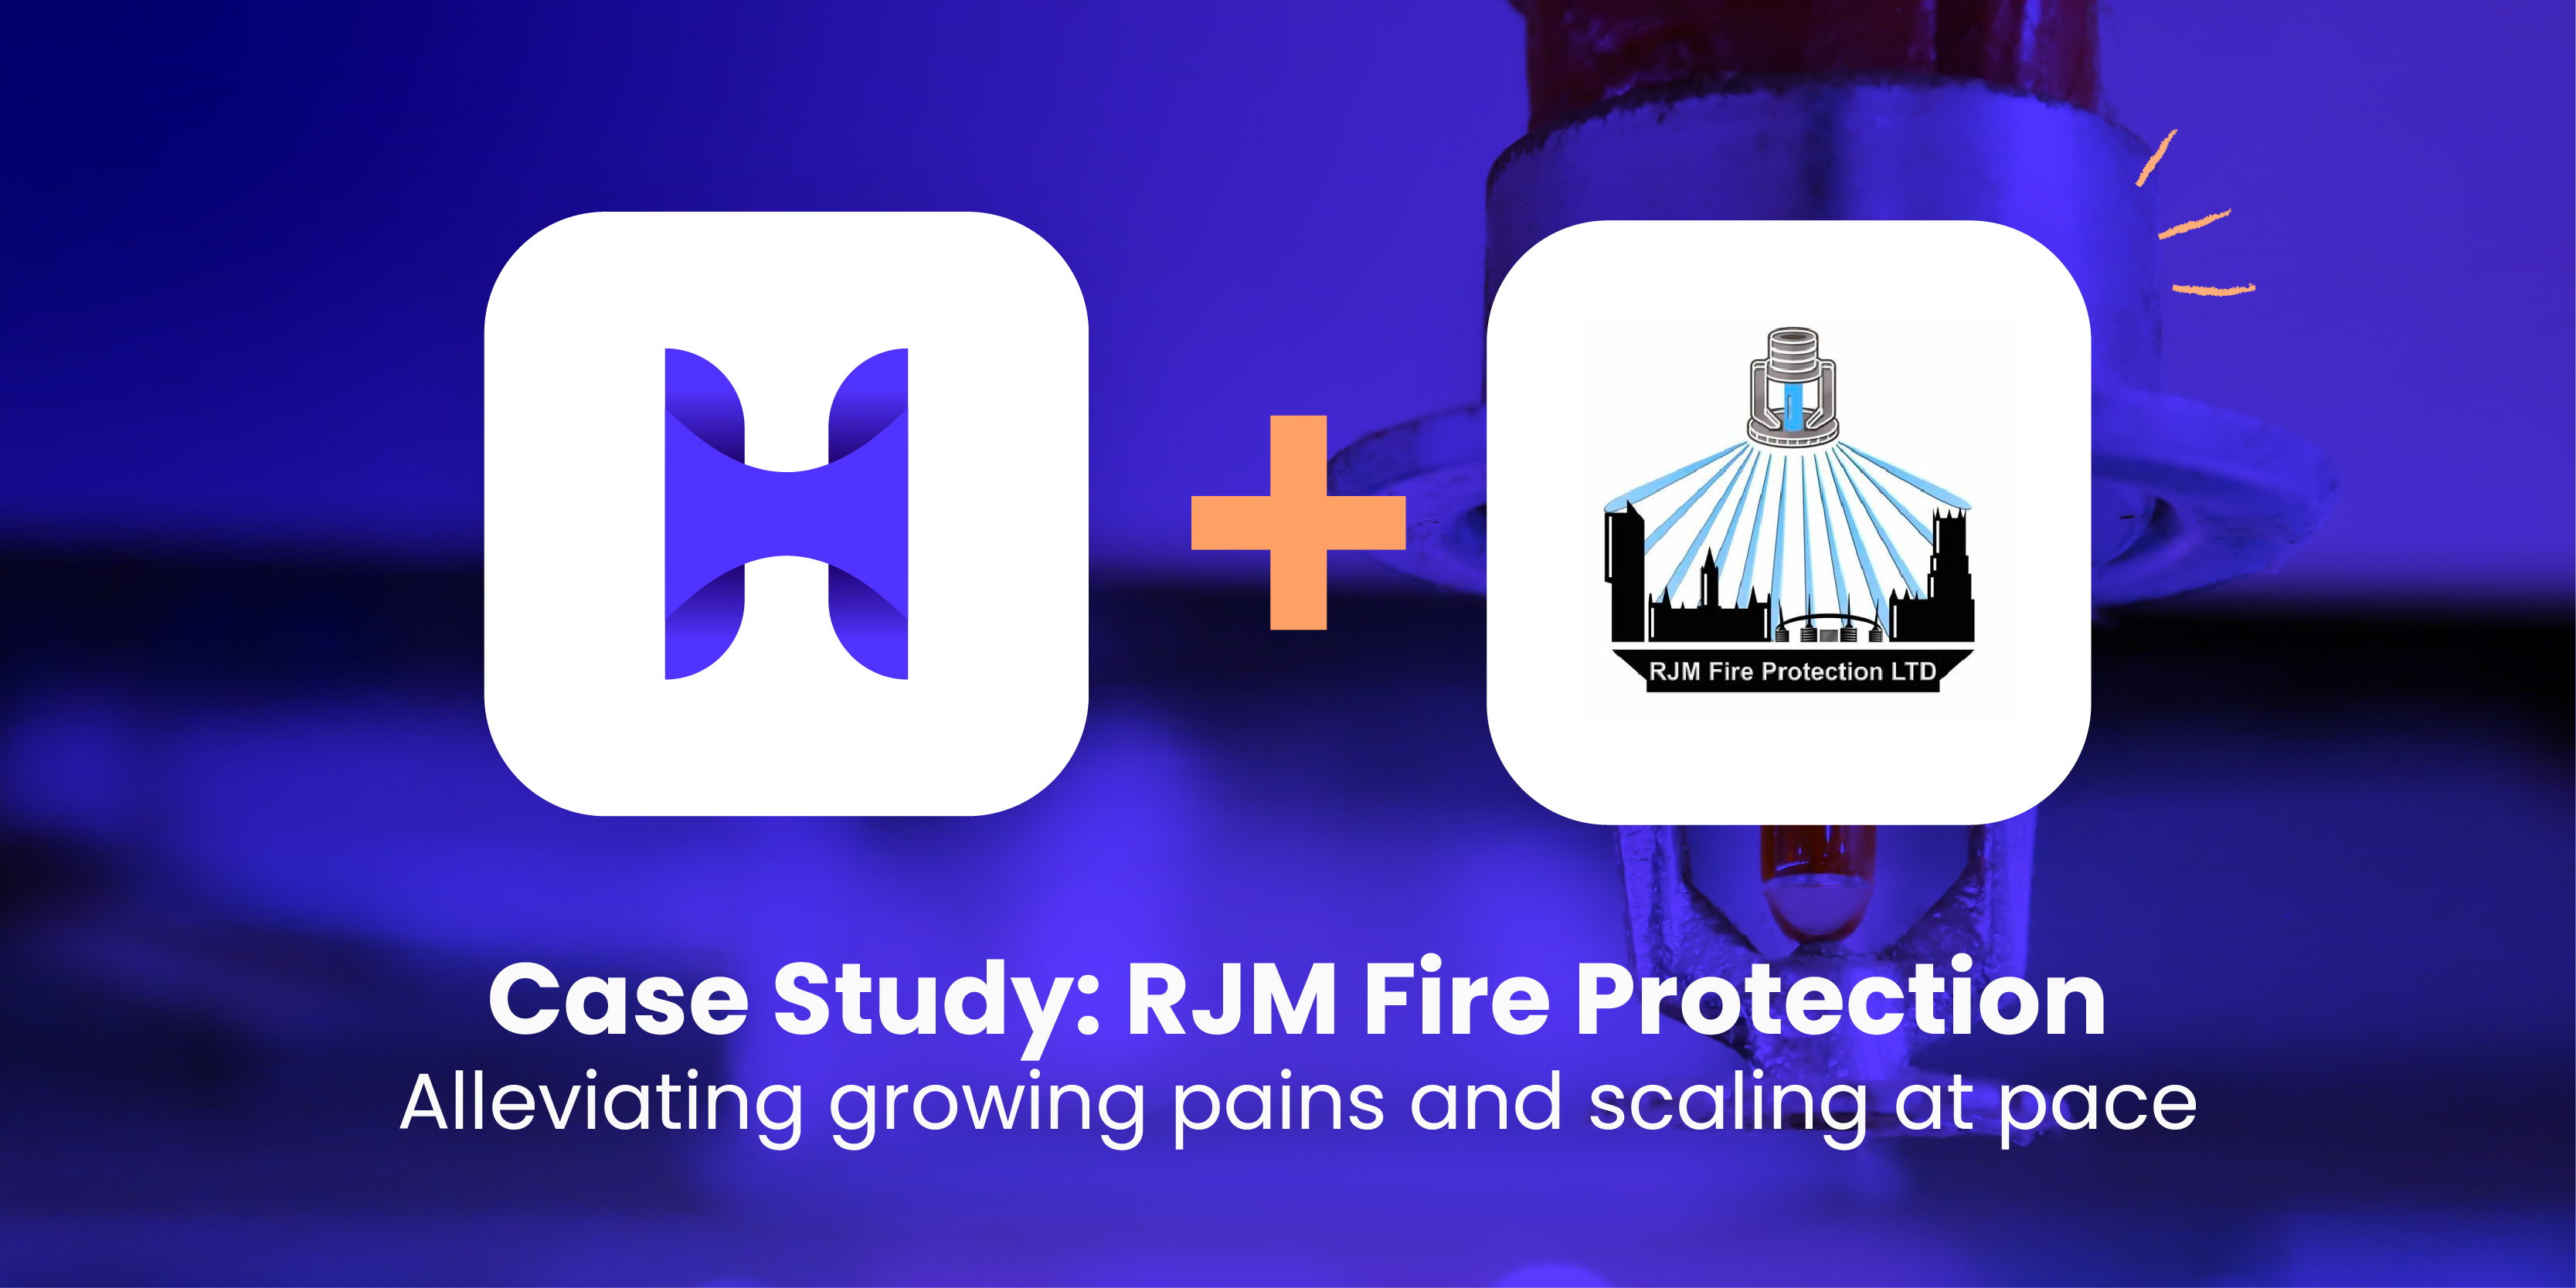 RJM Fire Protection - Case Study with Hydr